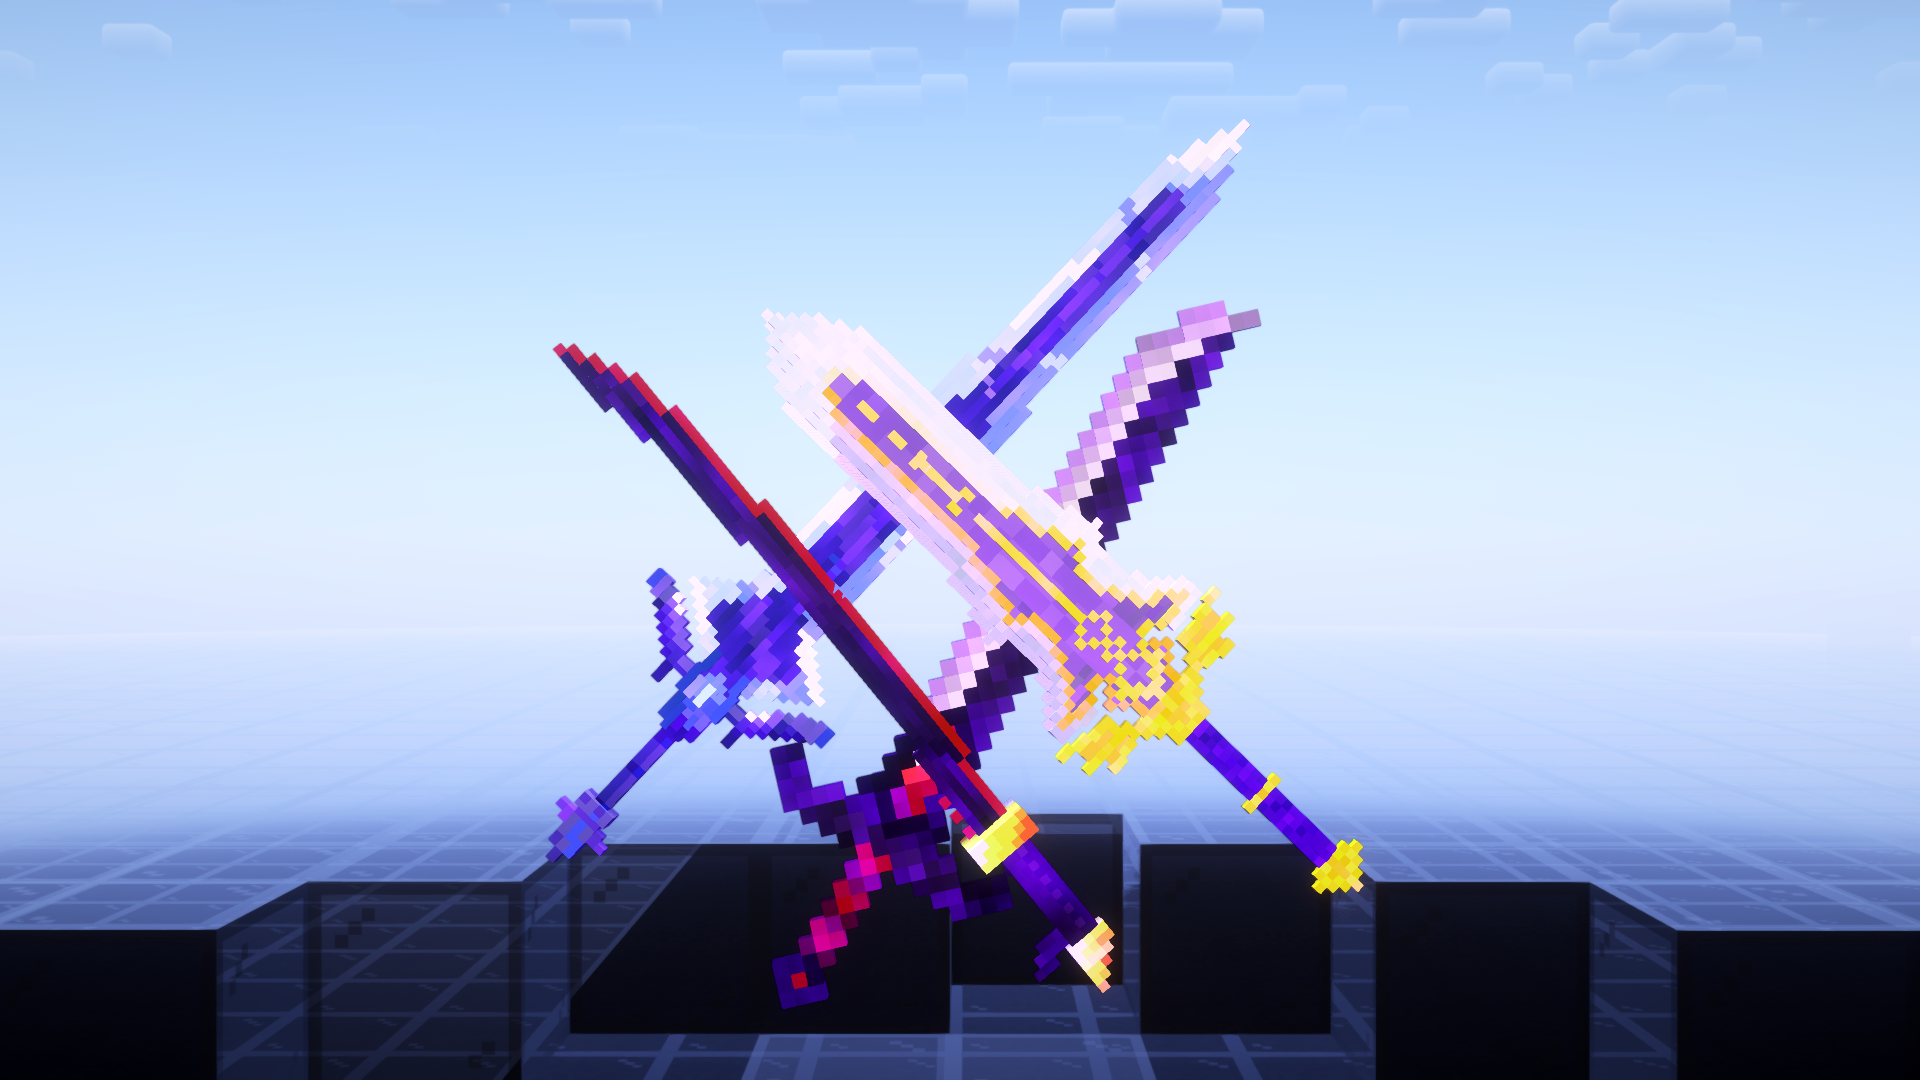 THE NEW SWORDS 